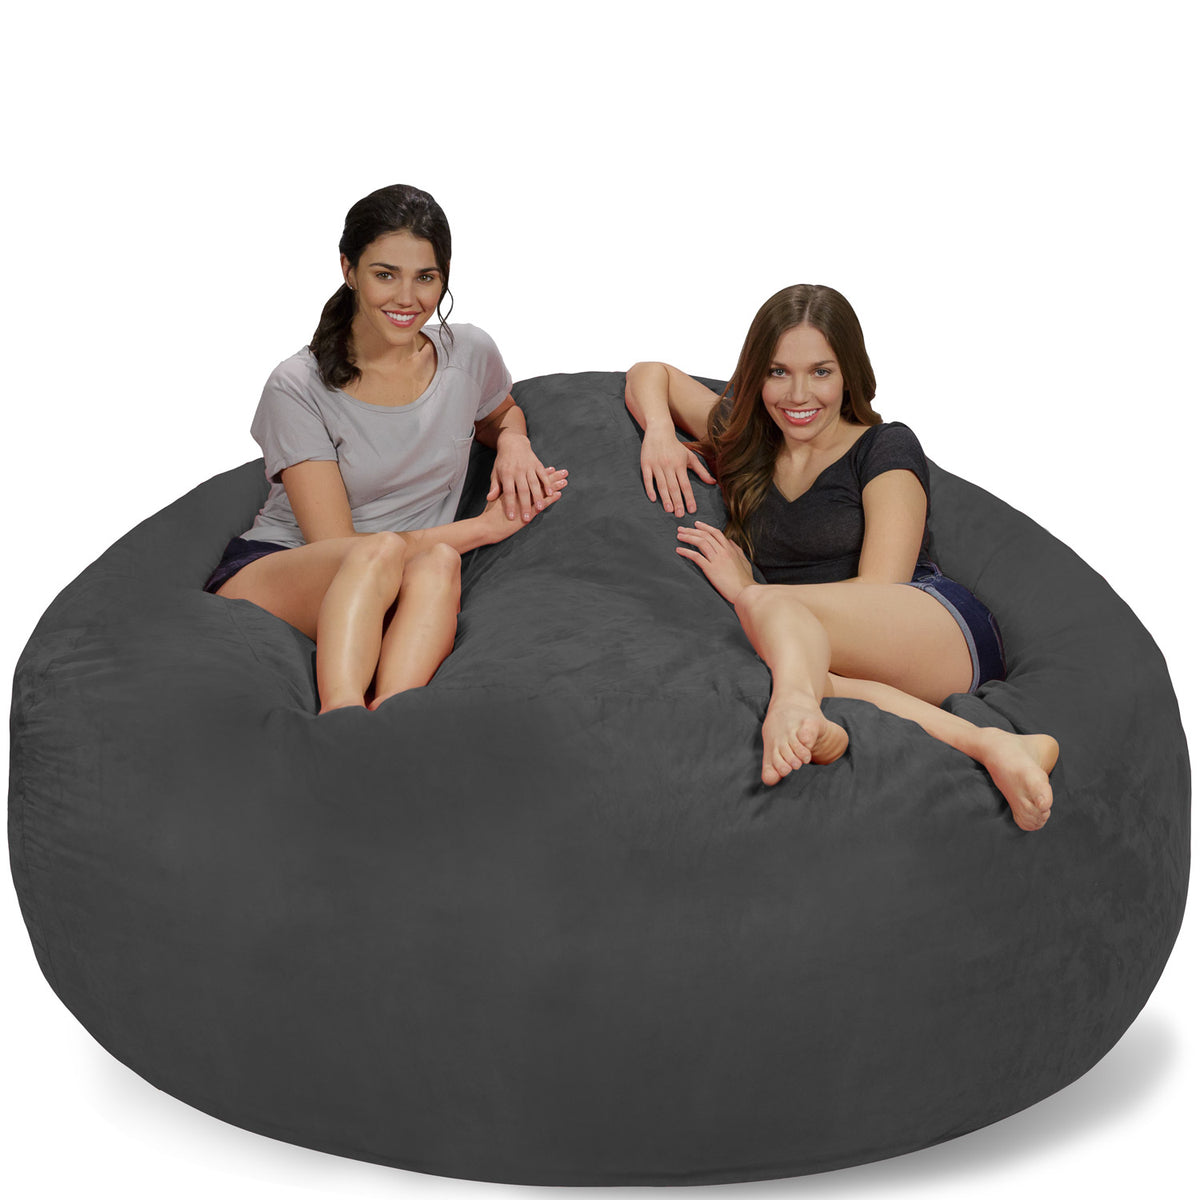  Bean Bag Chairs for Adults Bean Bag Covers Only 7ft Soft Beanbag  Giant Fur Bean Bag Chair for Adult Furniture (It was Only A Cover, Not A  Full Bean Bags) 